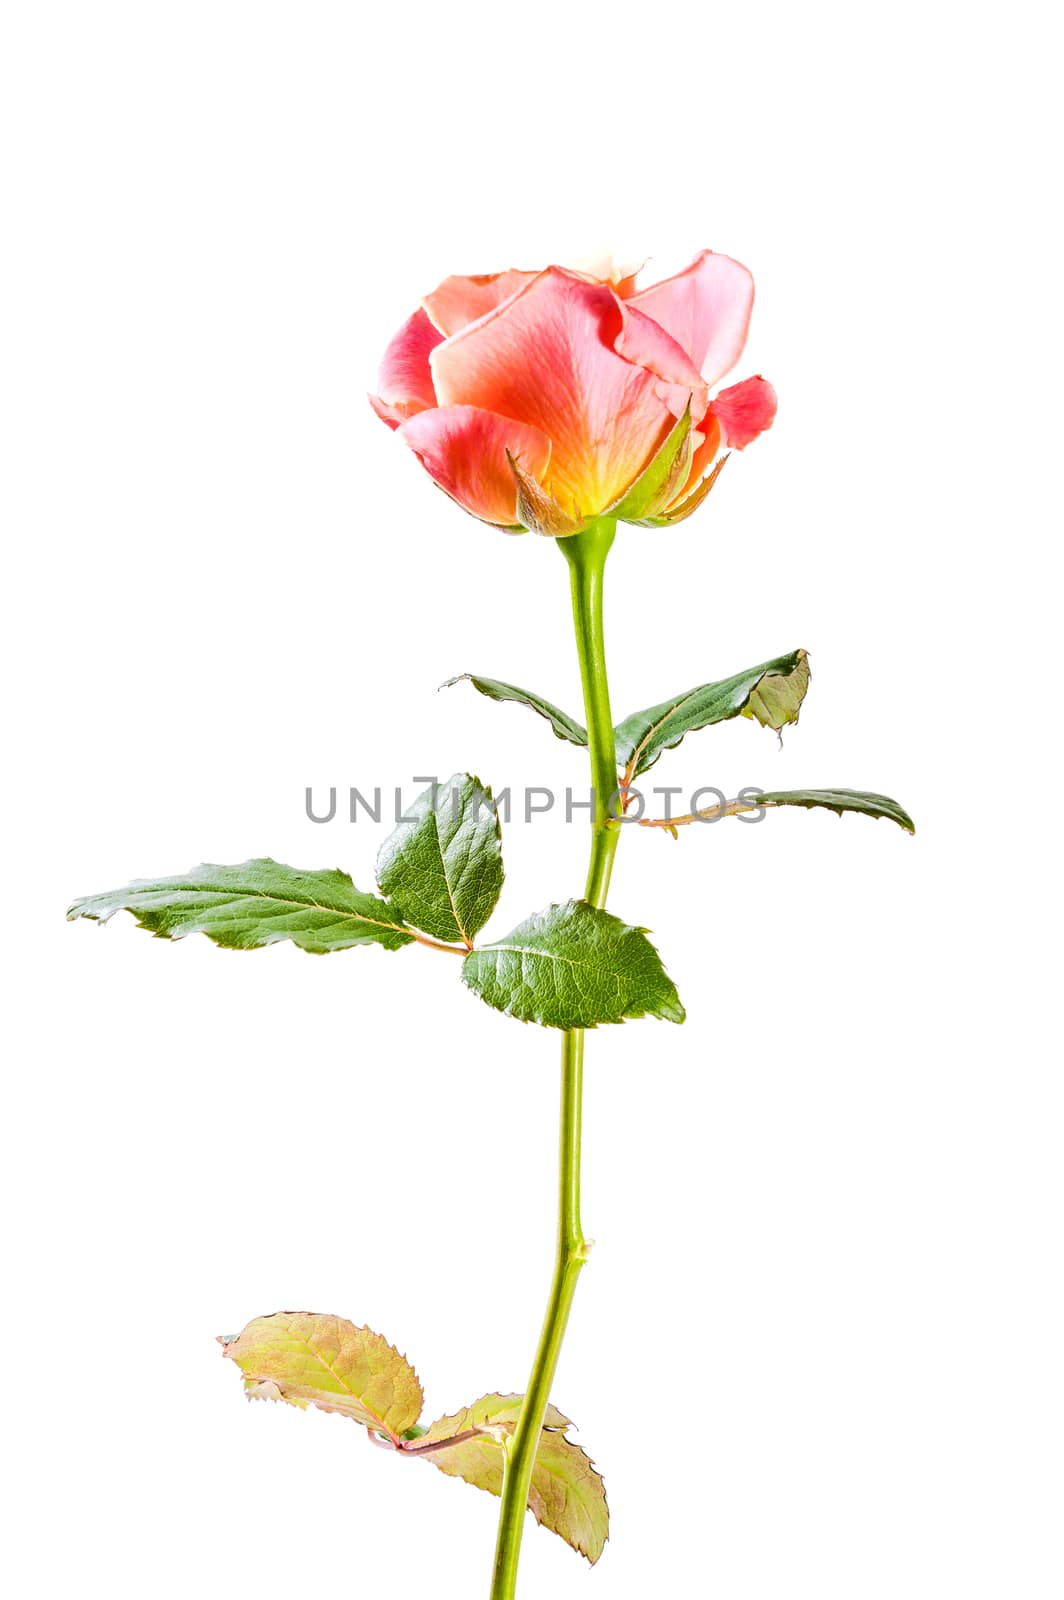 Beautiful pink rose flowers isolated on white background